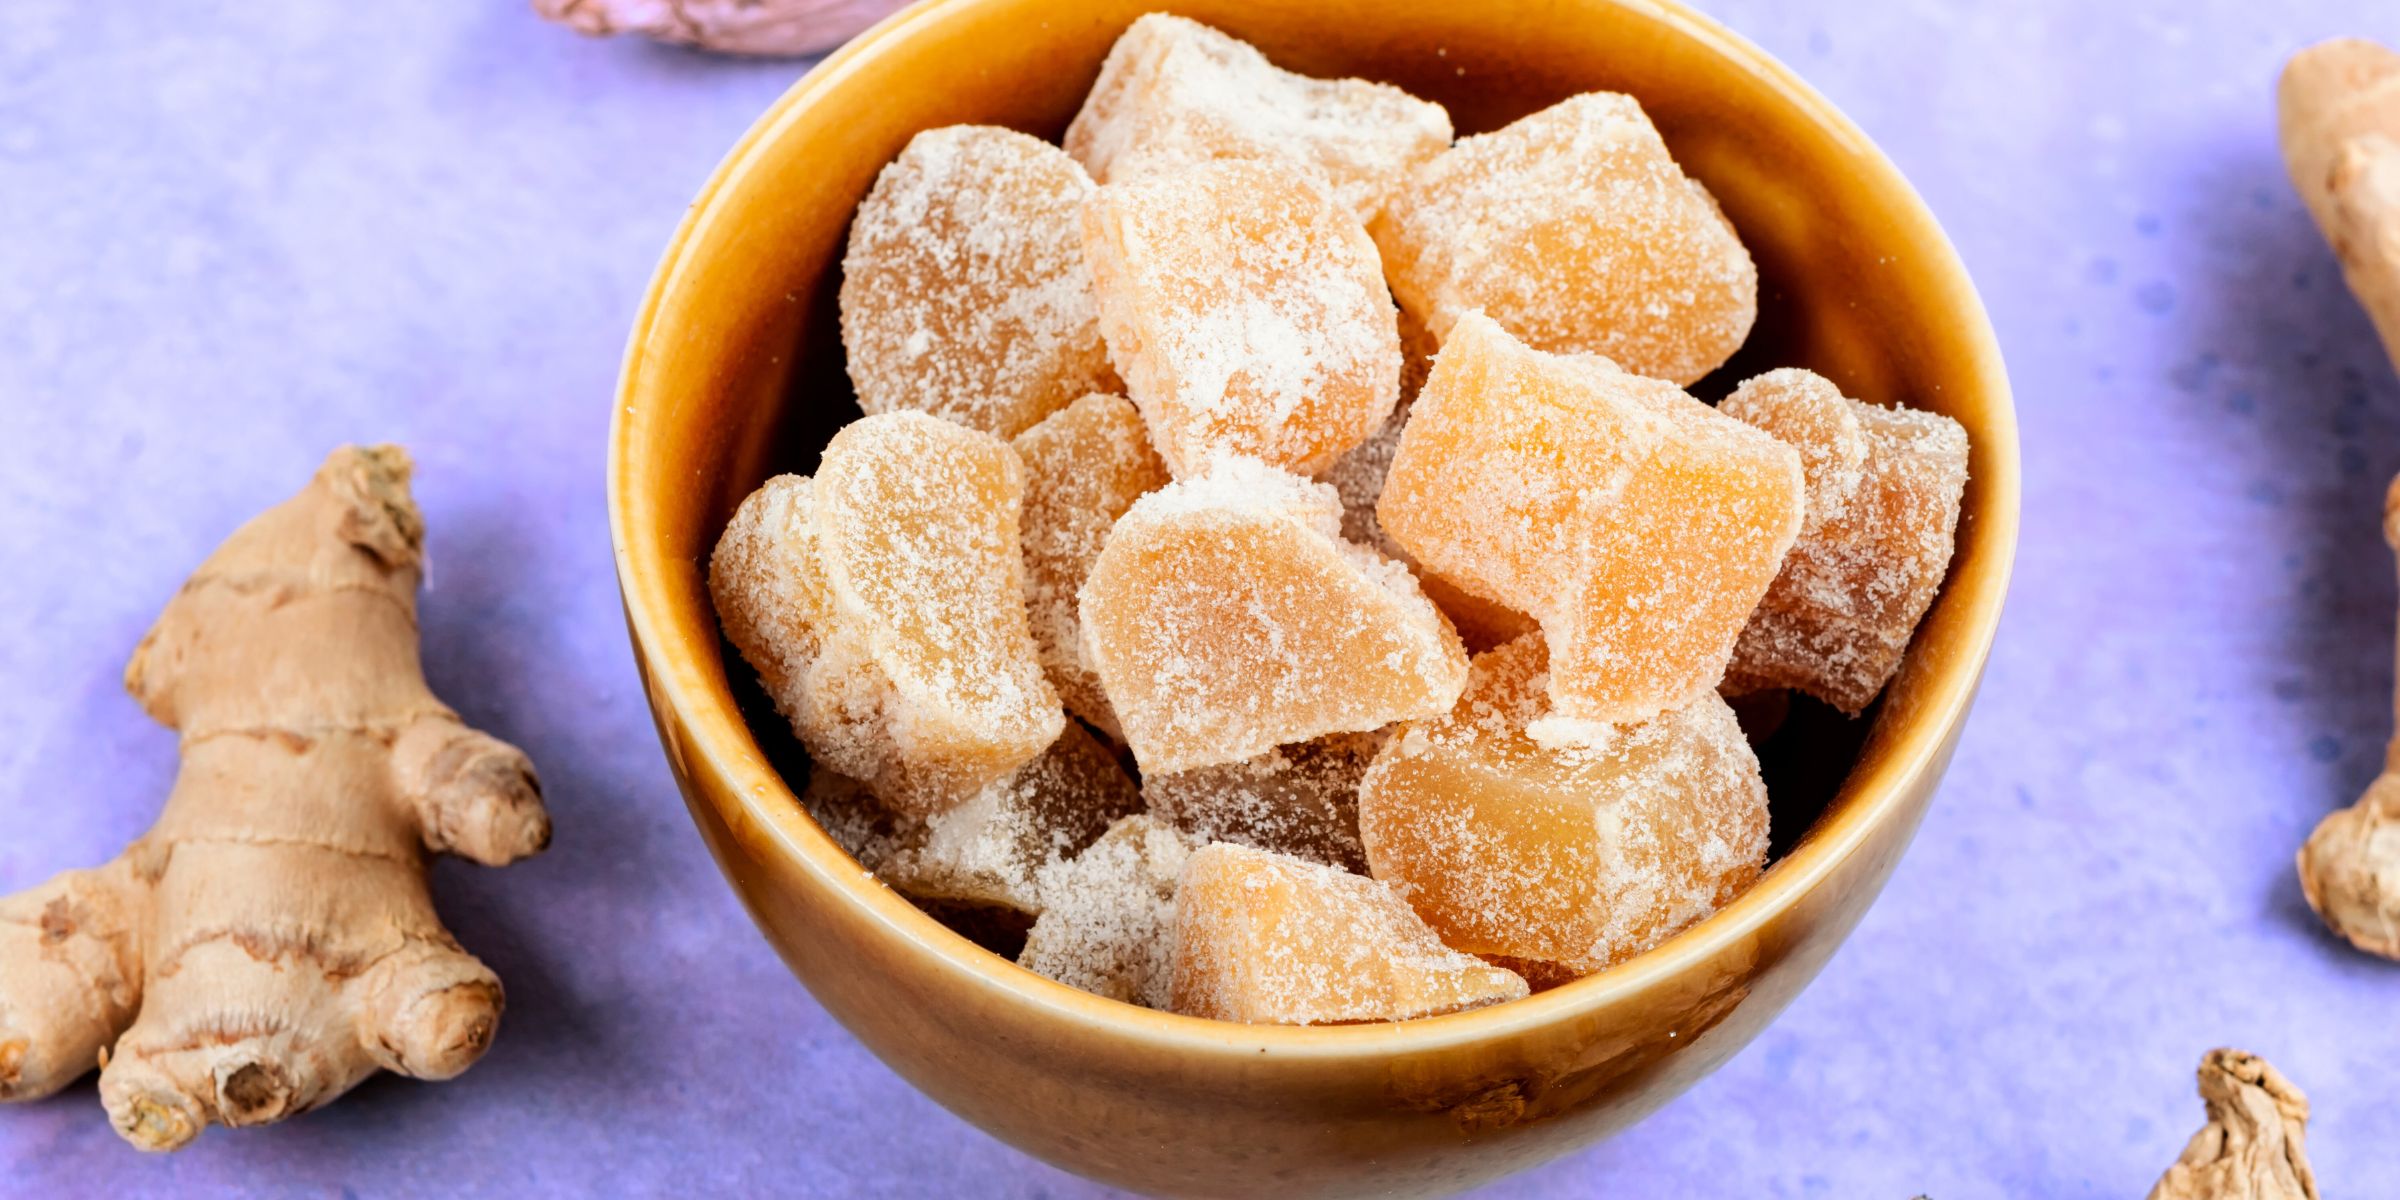 ginger candies helps upset stomach